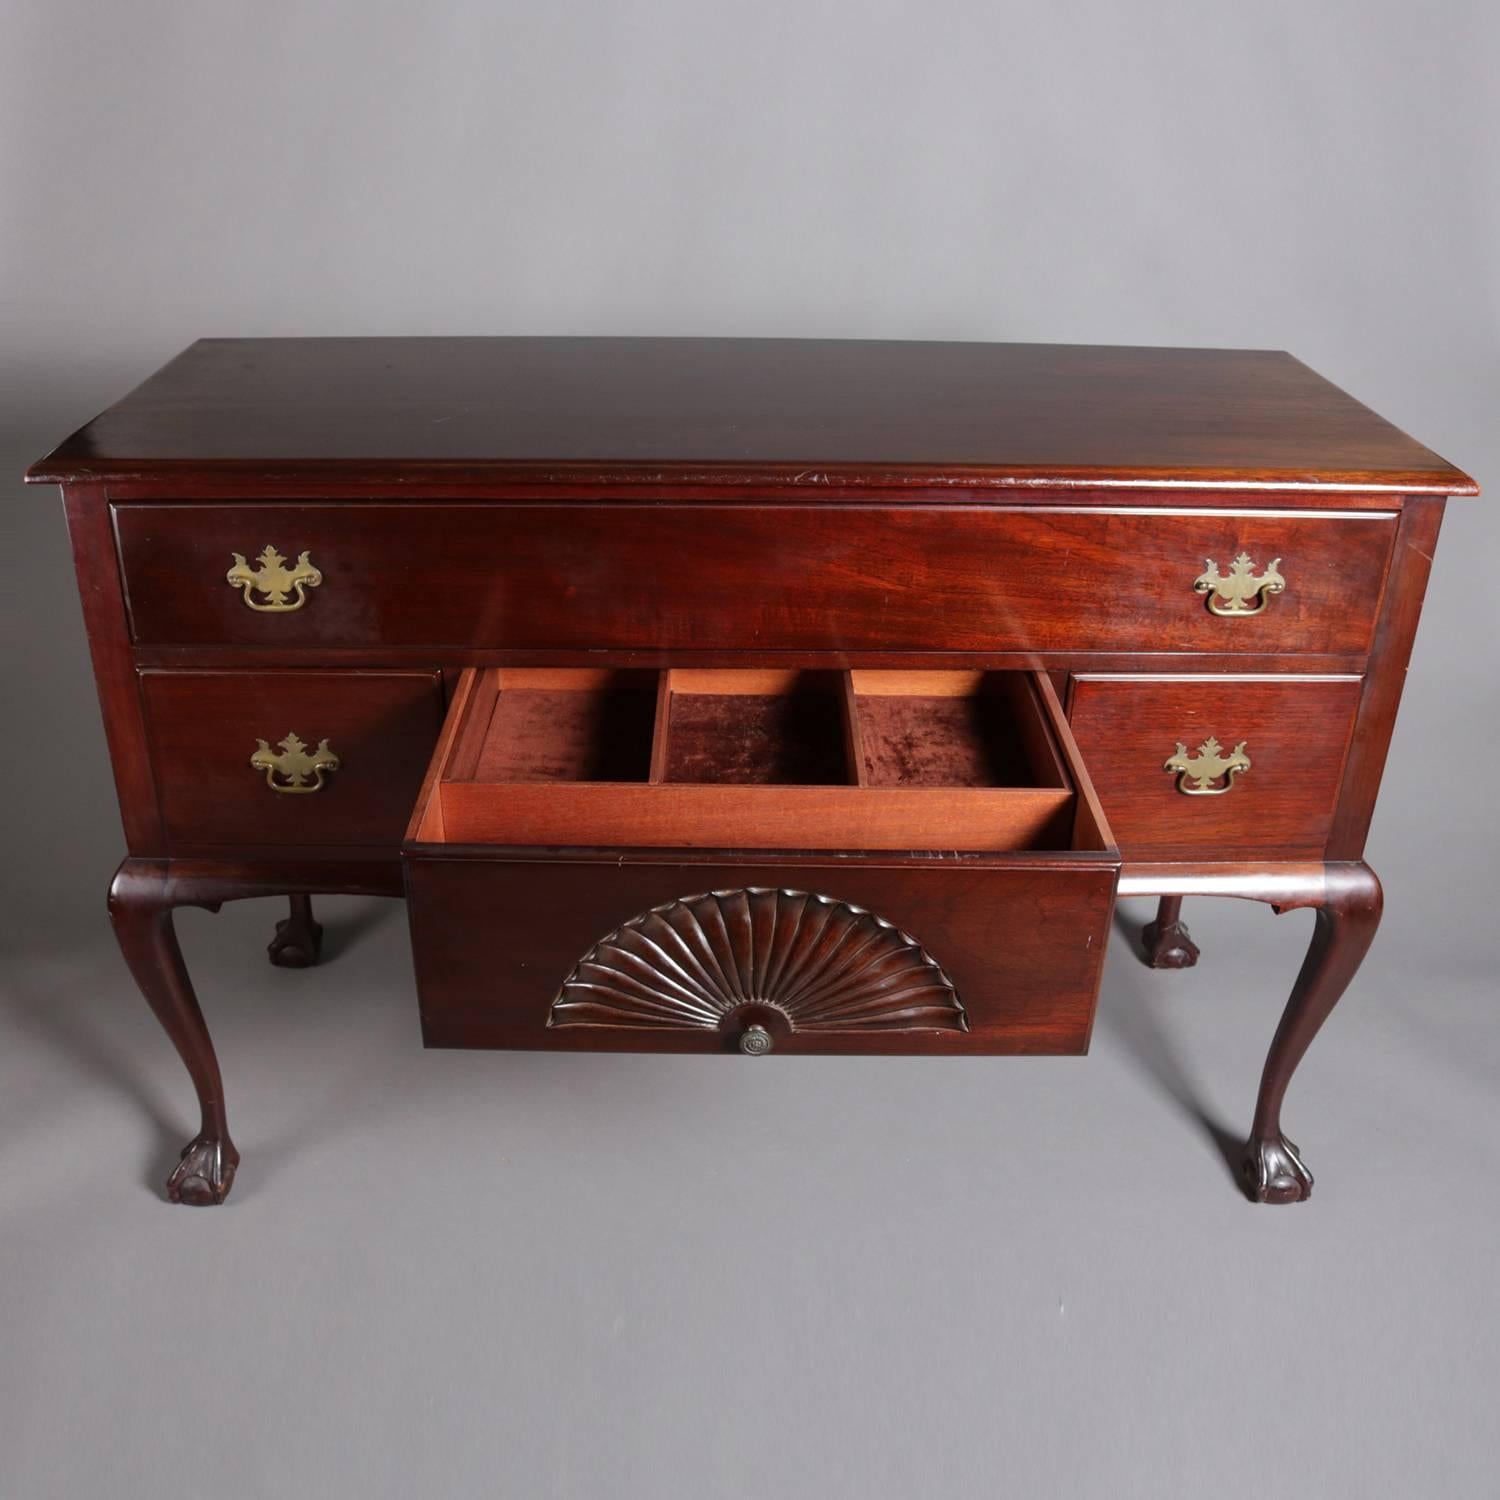 Chippendale style server feature mahogany construction with one long upper drawer above central silver and flanking drawers, silver drawer with carved scallop shell, raised on cabriole legs terminating in claw and ball feet, brass pulls throughout,